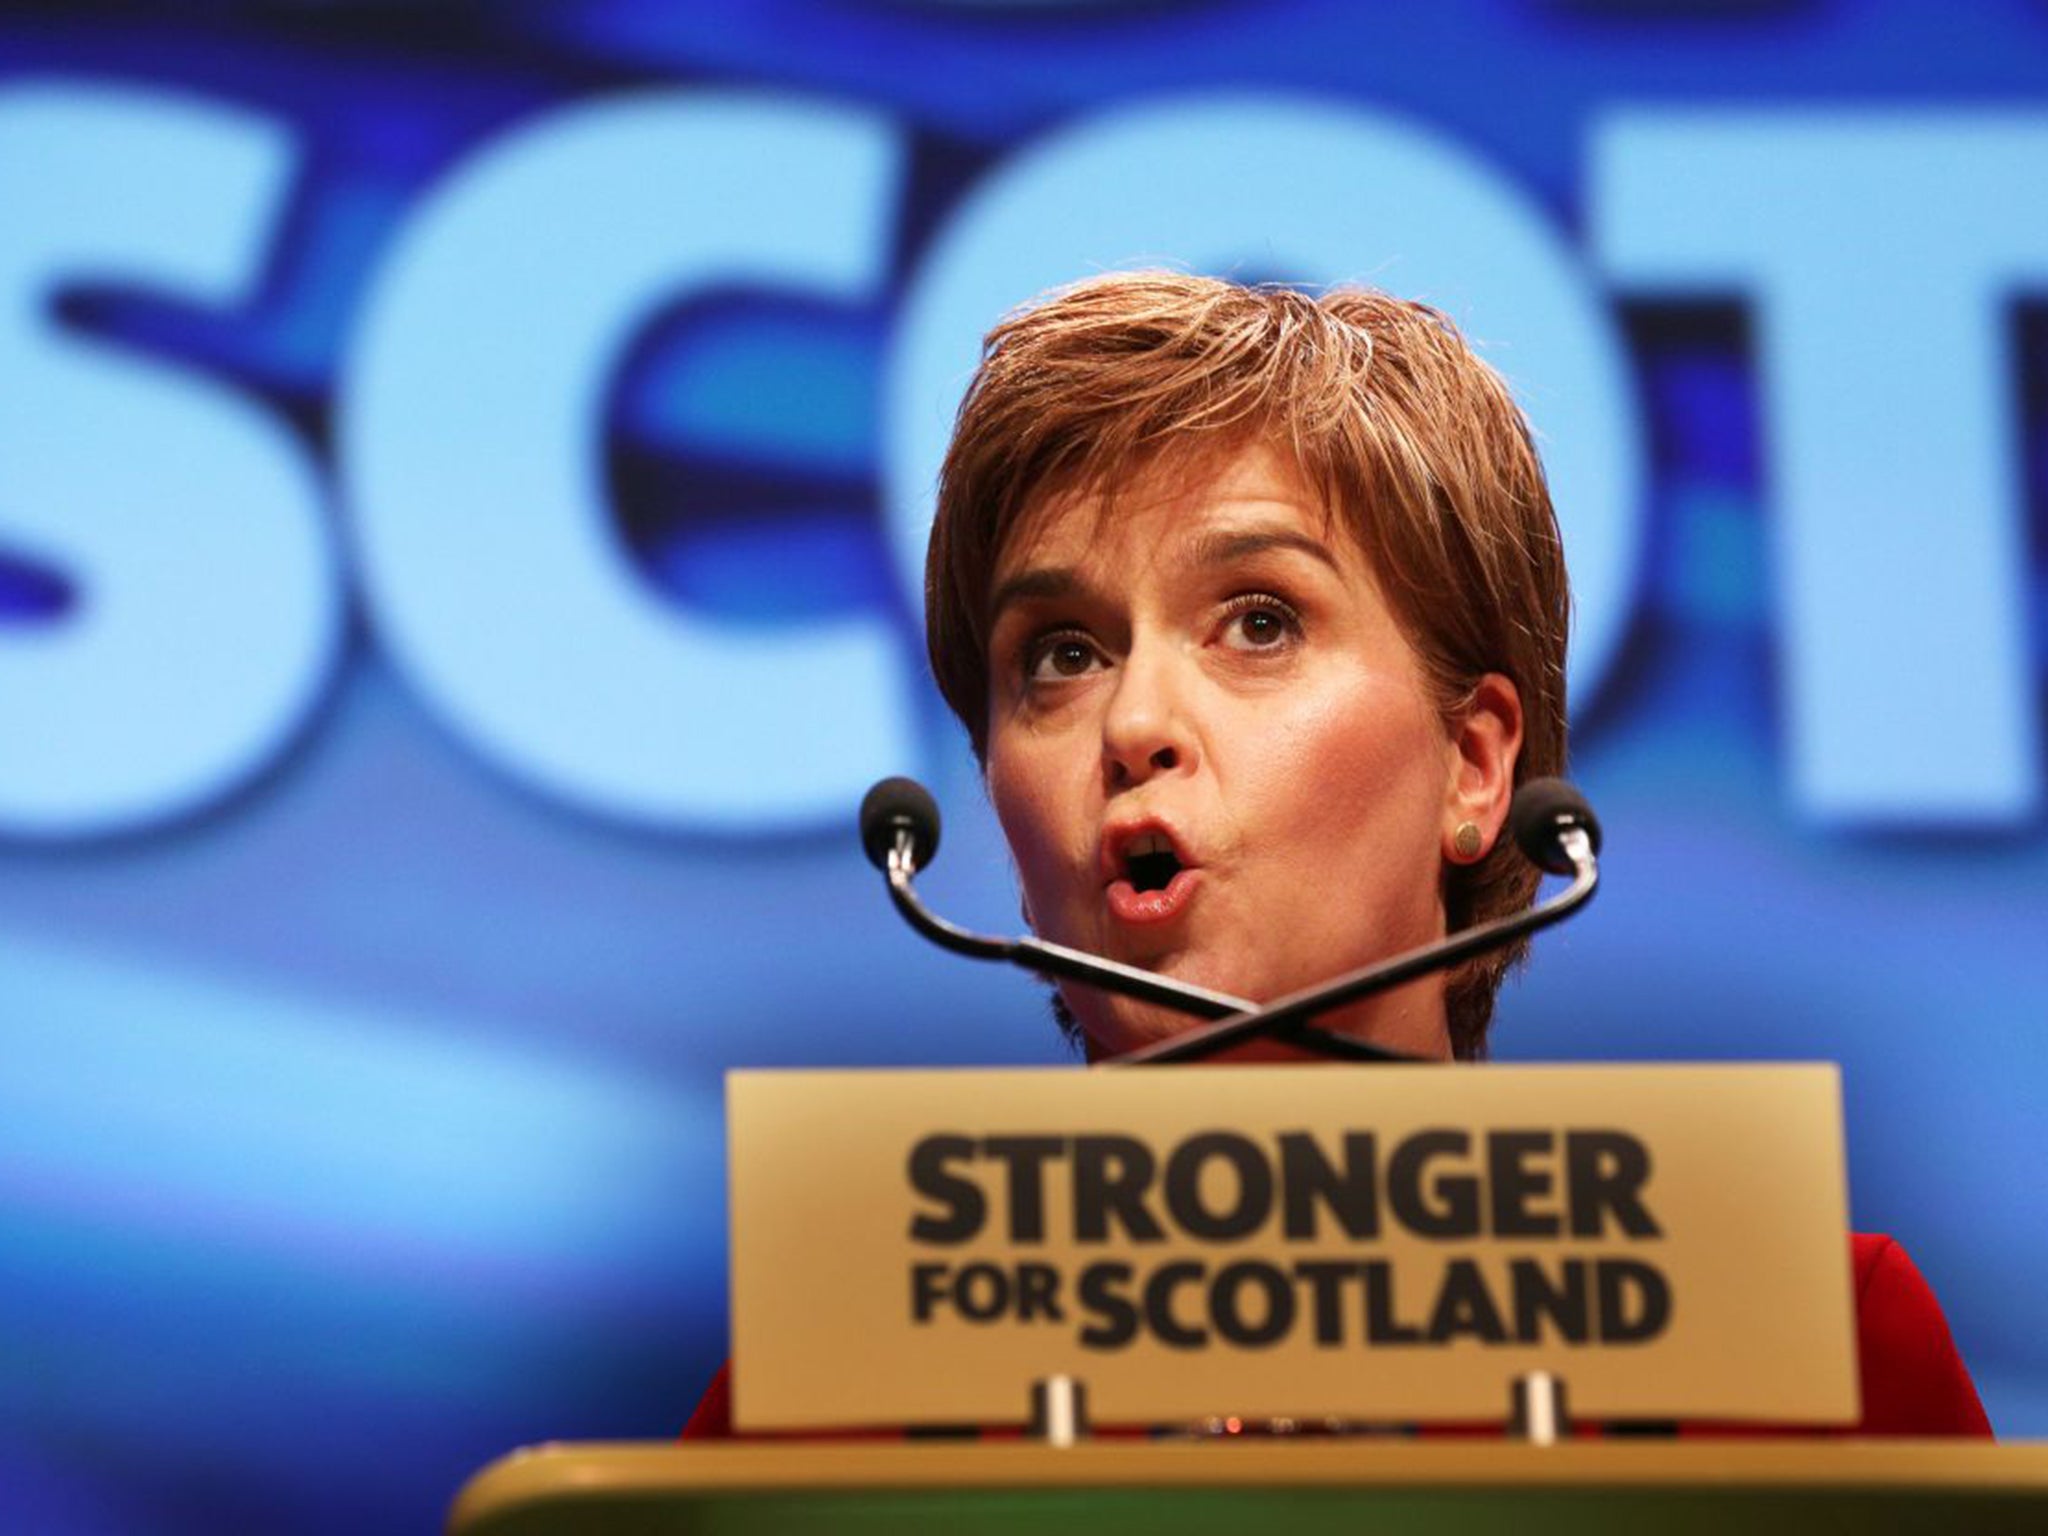 In her speech Nicola Sturgeon labelled the Tories and Labour as “can't do parties”